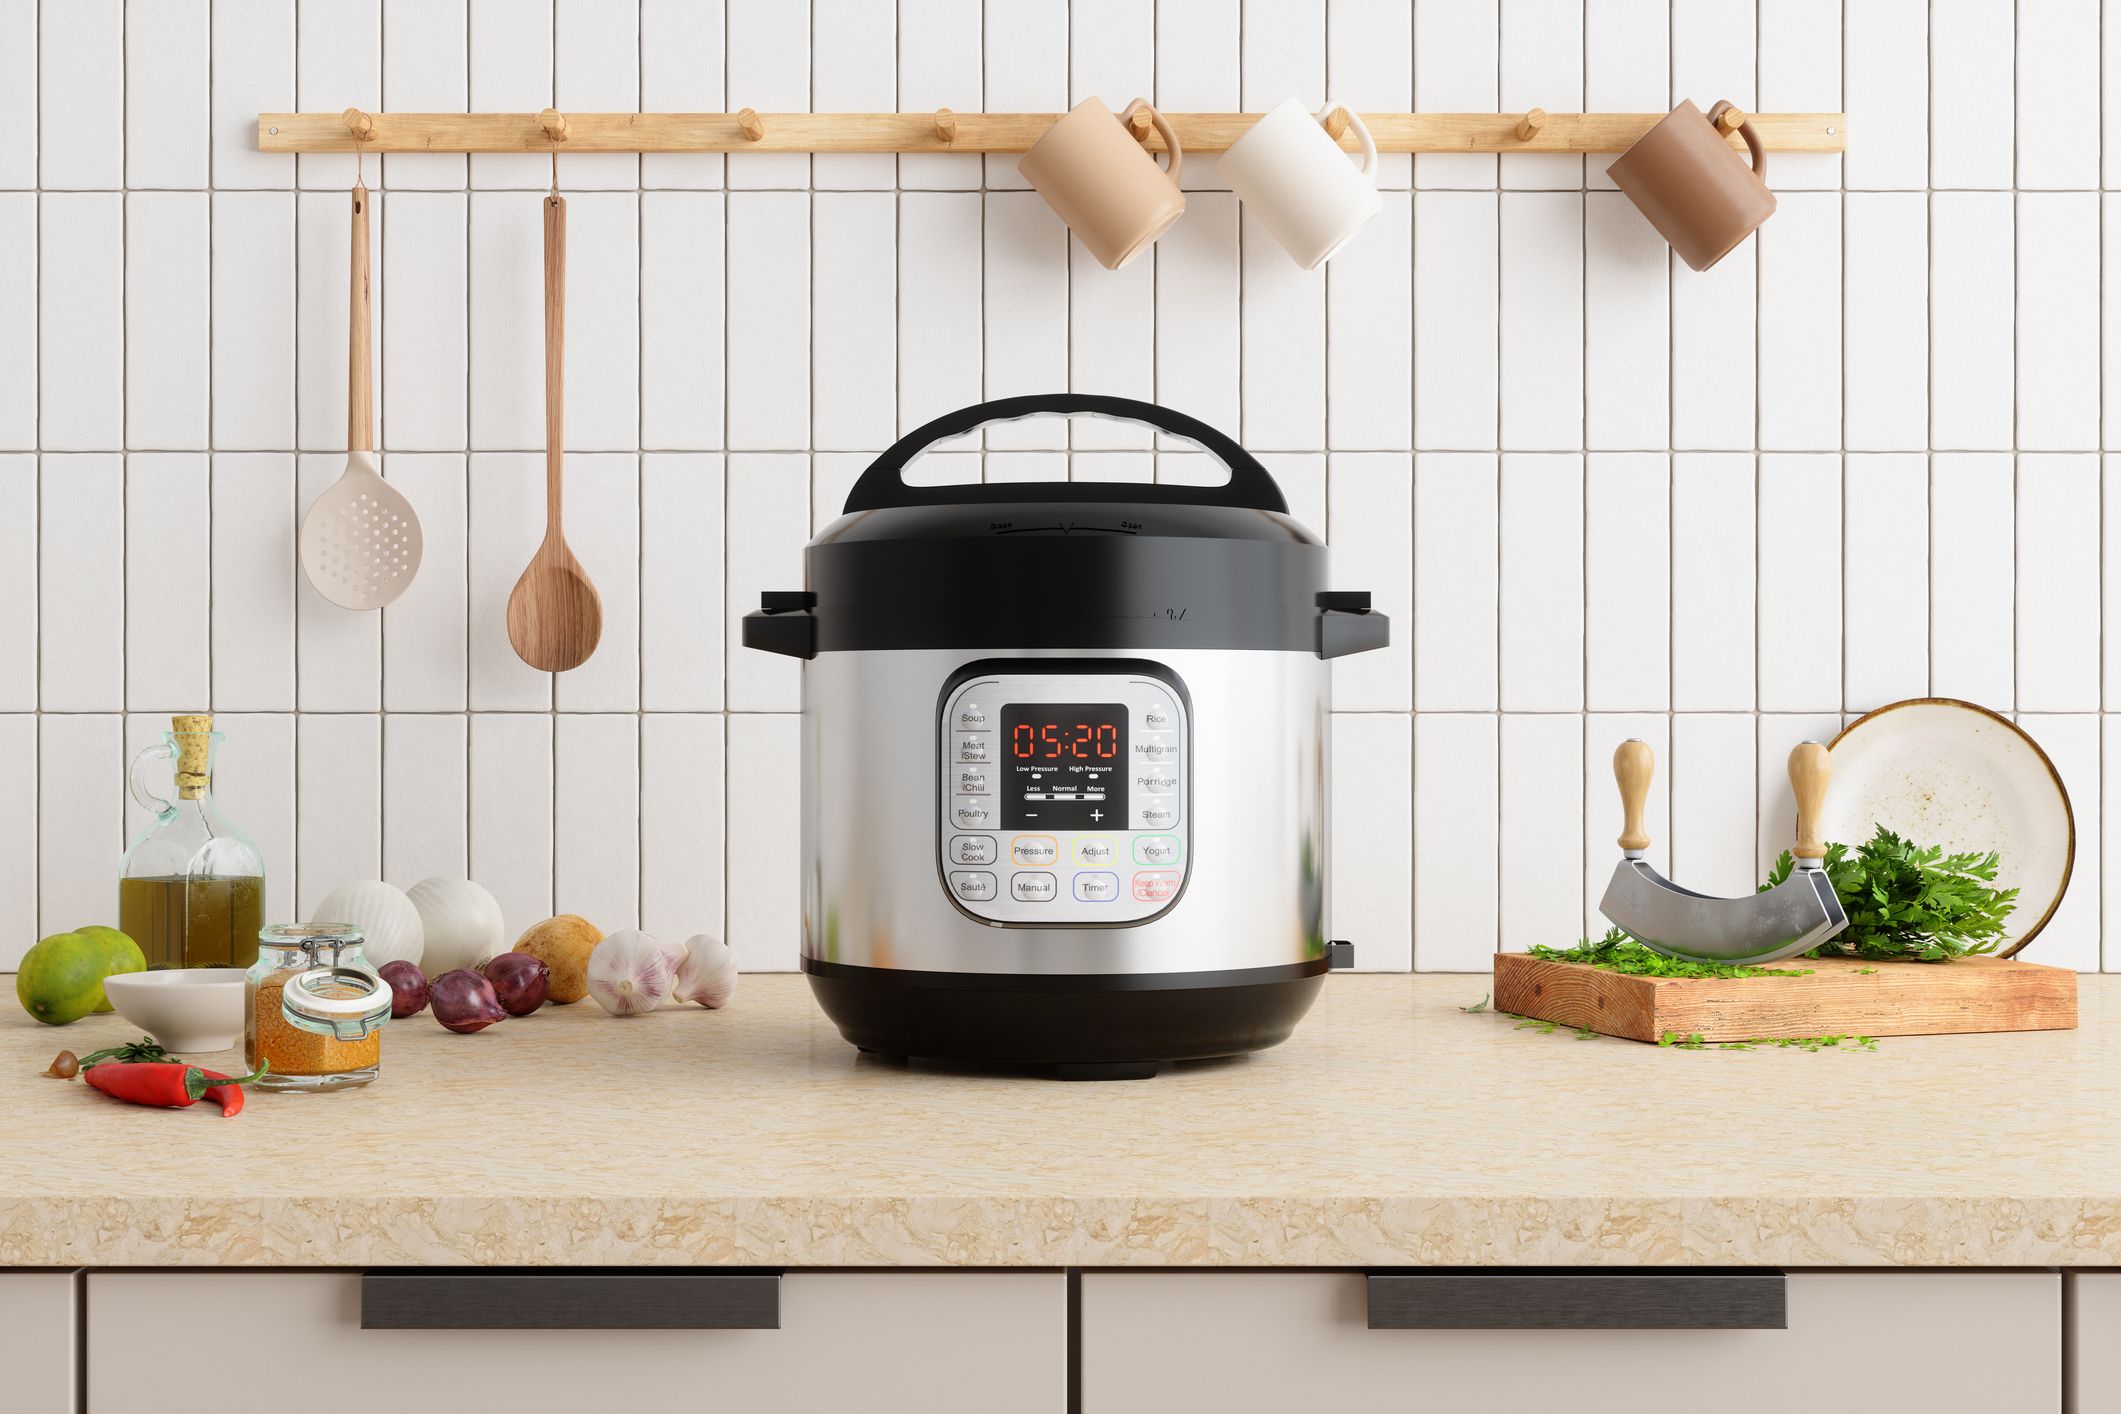 https://hips.hearstapps.com/hmg-prod/images/multi-cooker-on-kitchen-counter-with-onions-garlic-royalty-free-image-1667514293.jpg